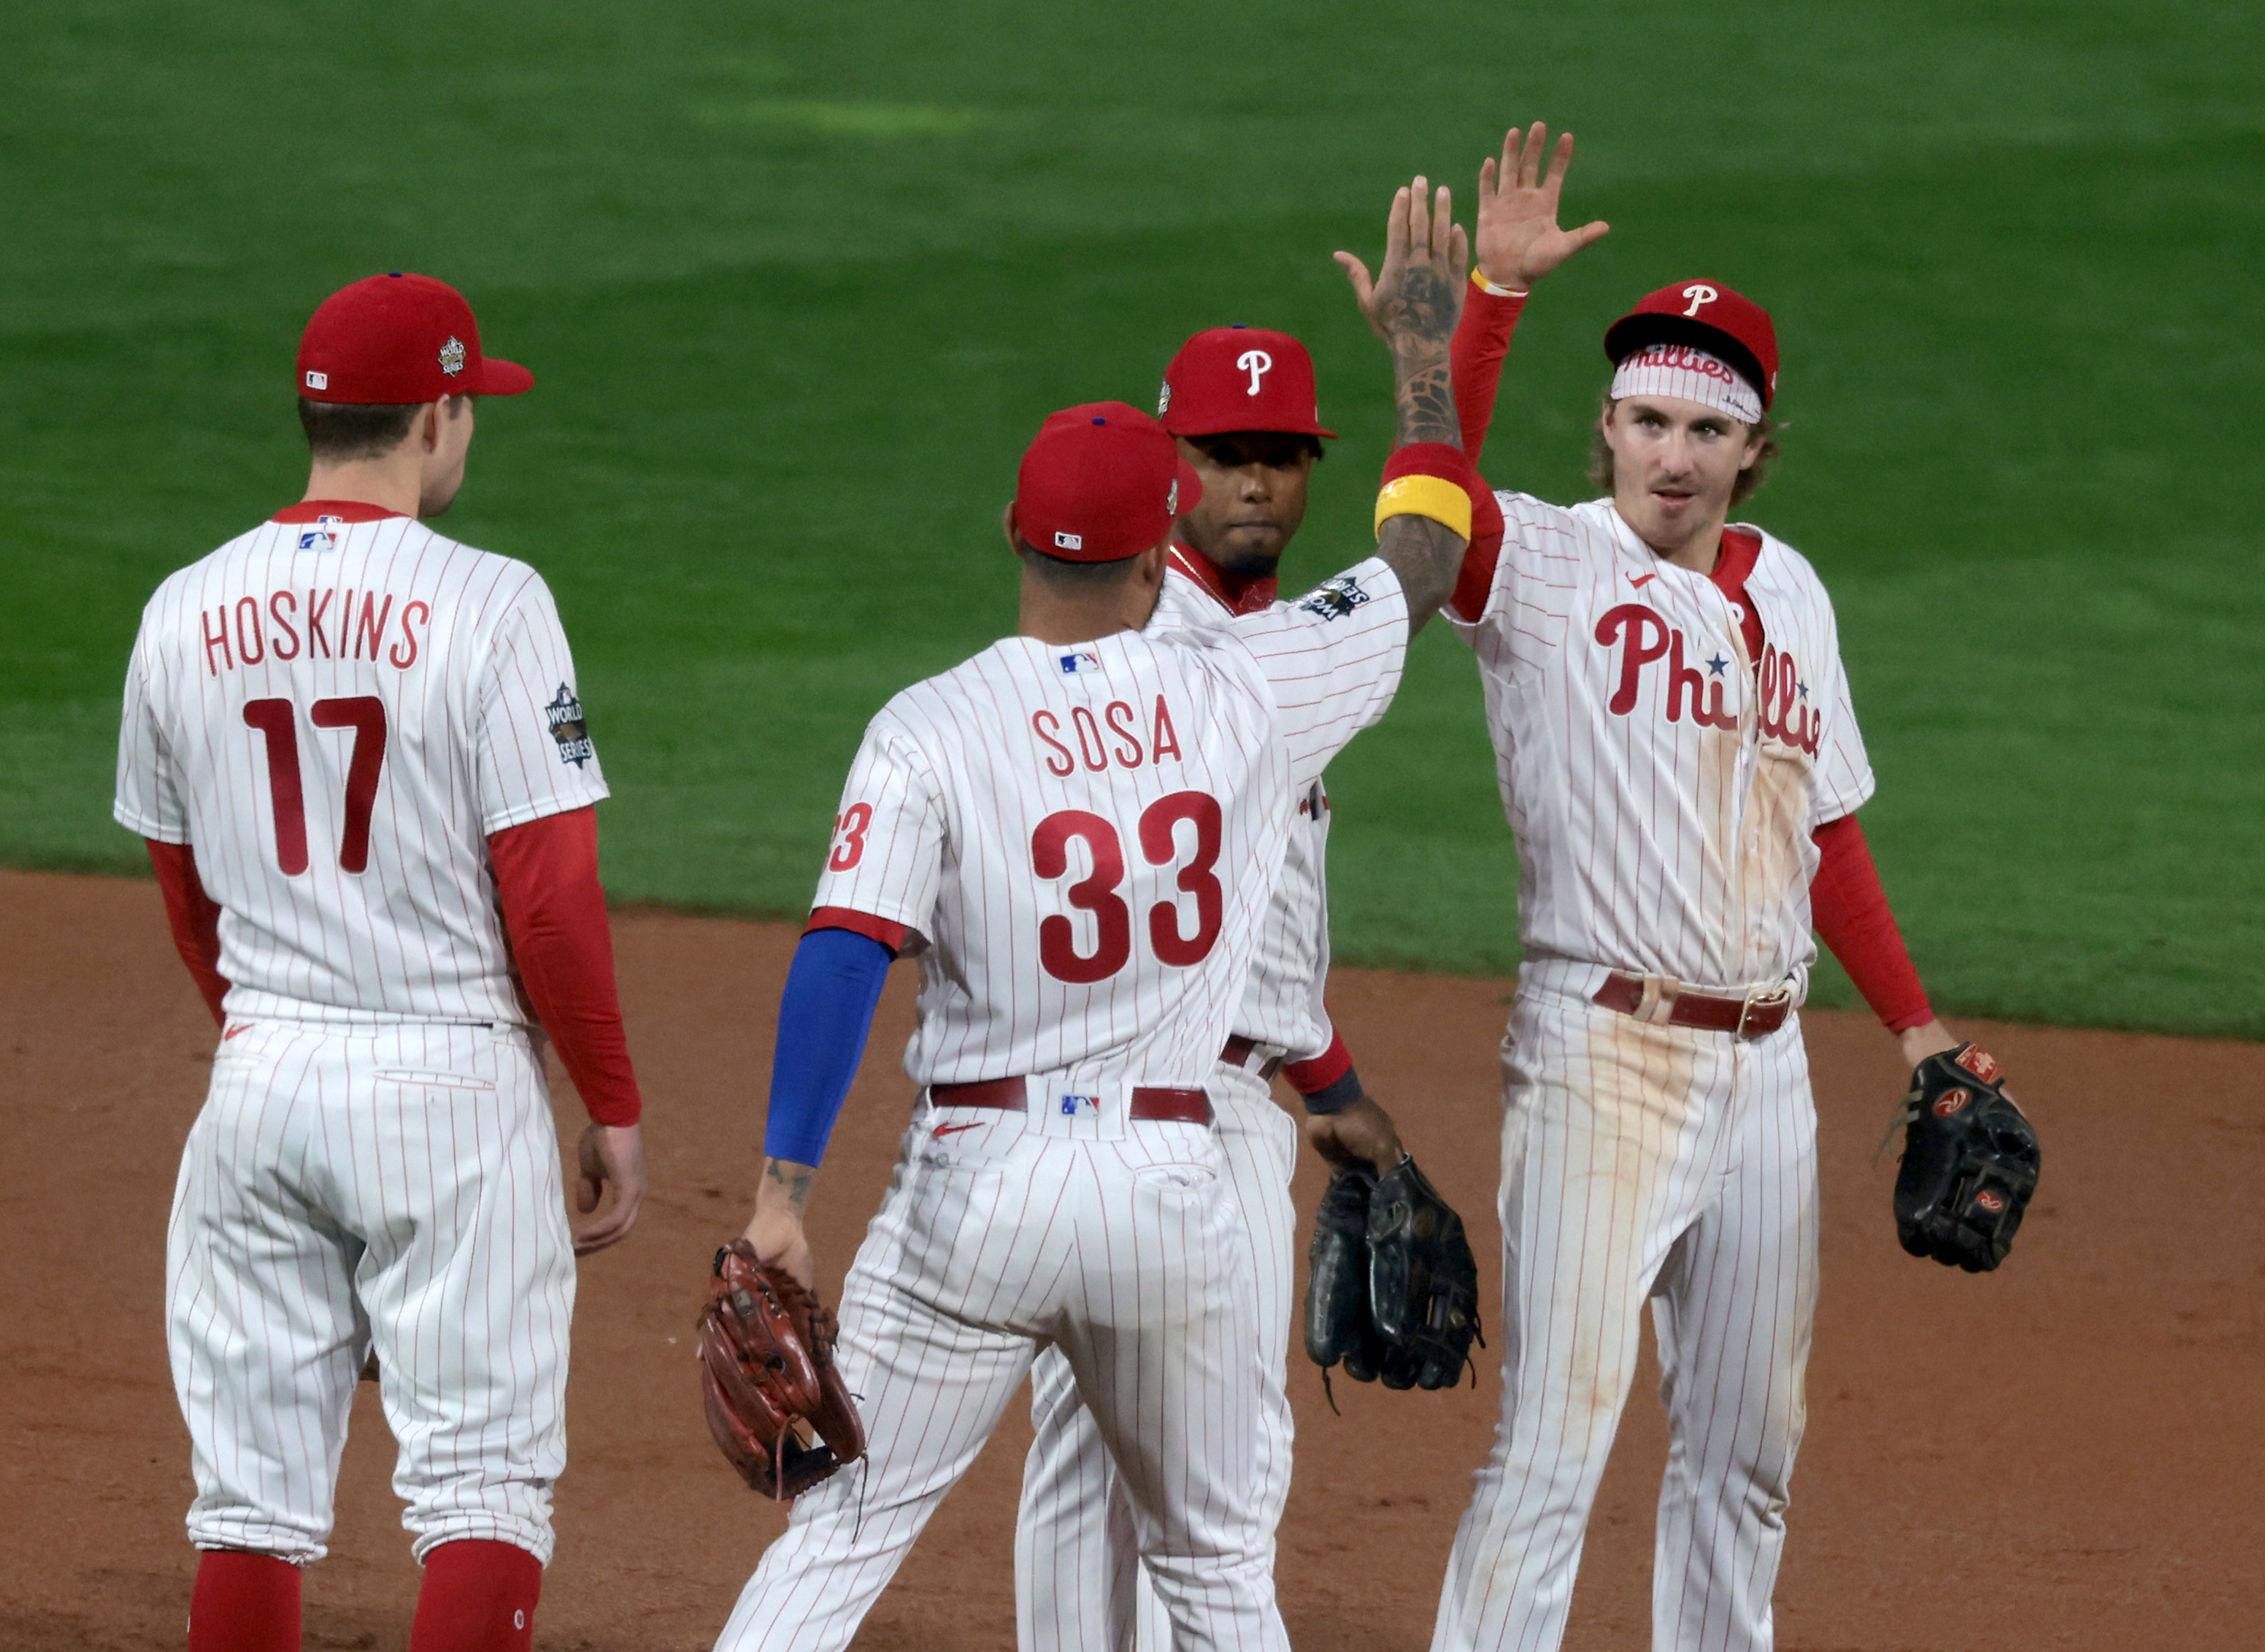 The Philadelphia Phillies celebrate a 7-0 victory vs.the Houston Astros in Game 3 of the World Series at Citizens Bank Park, Tuesday, Nov. 1, 2022.